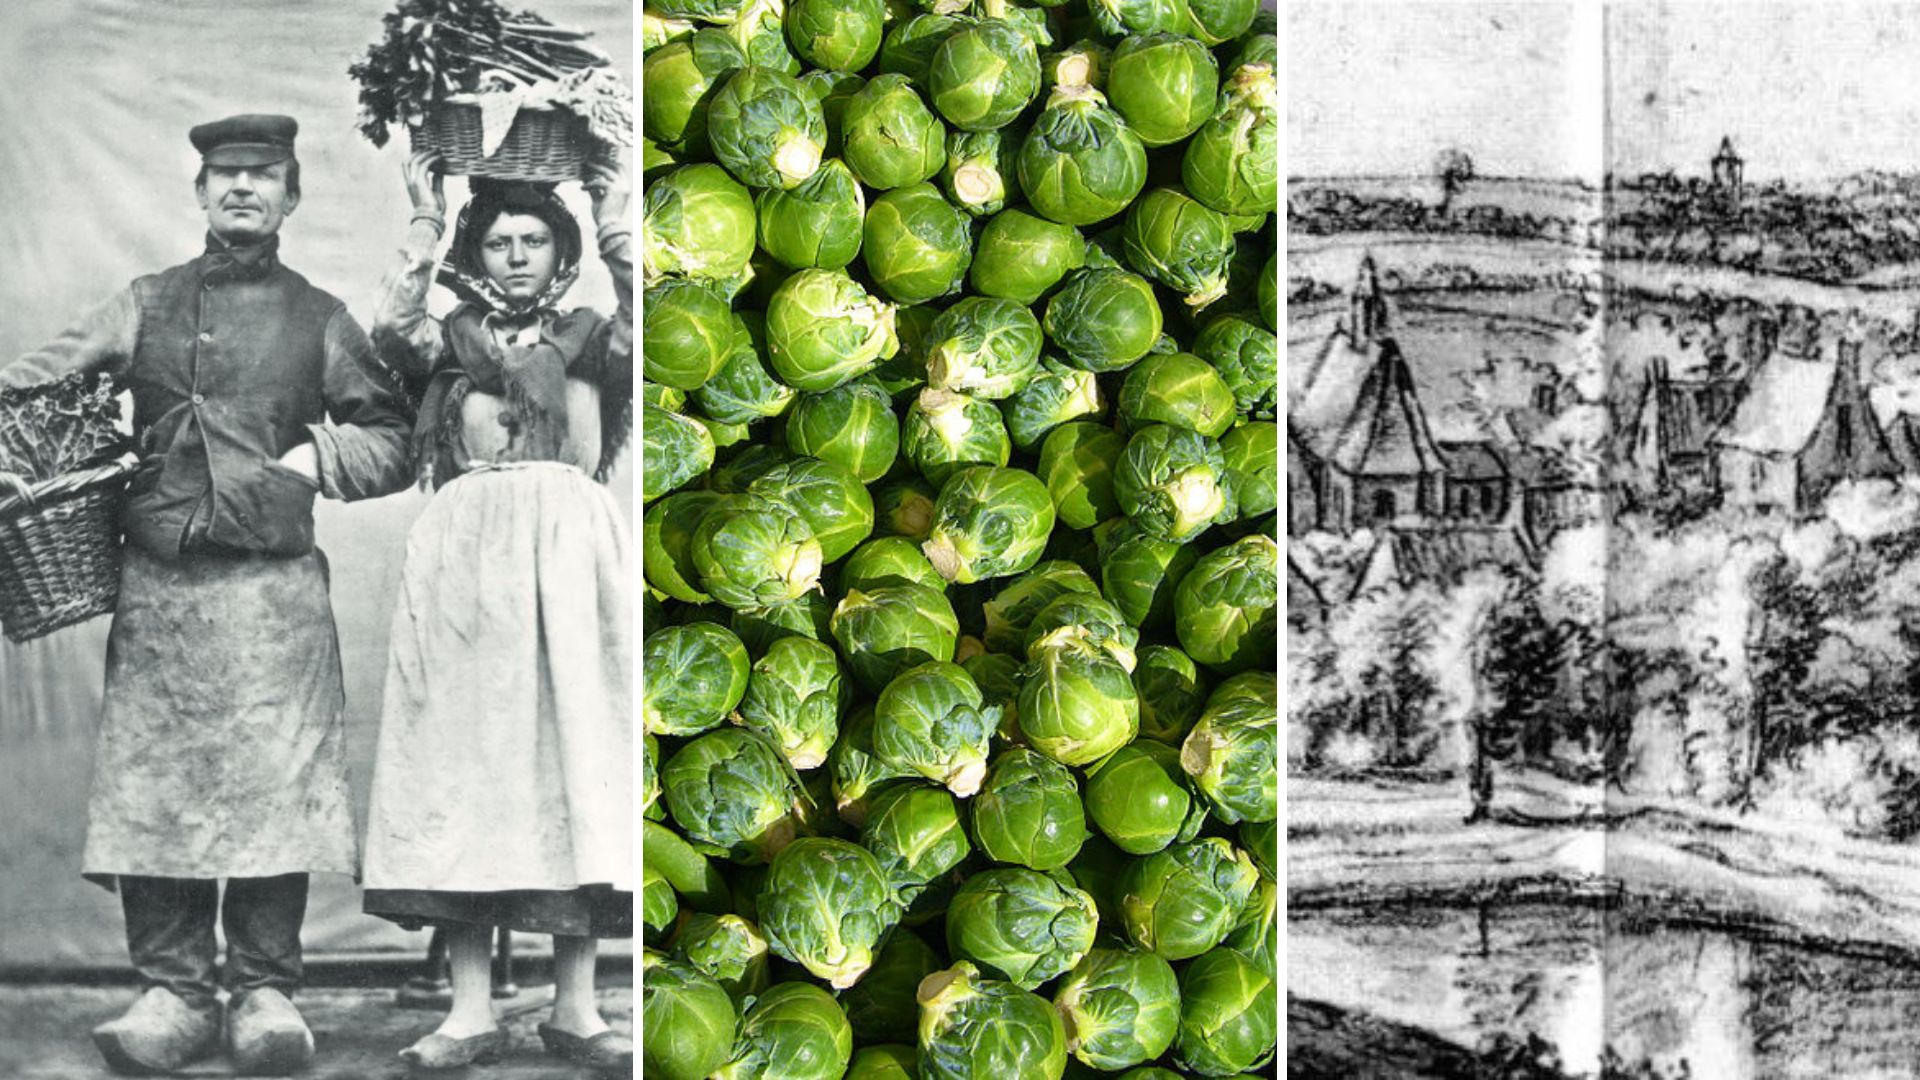 A Belgian history of the Brussels sprout